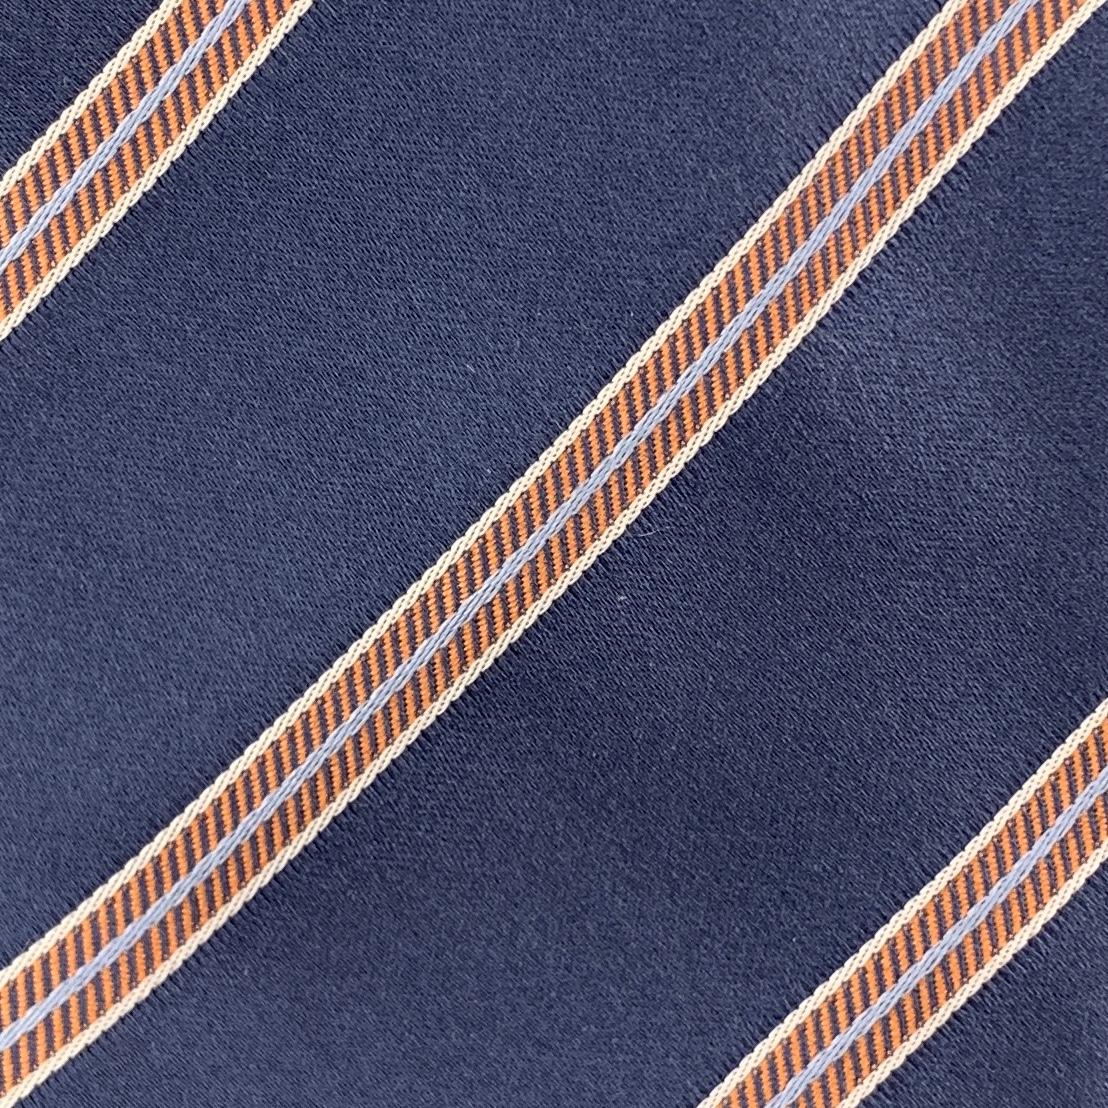 BRIONI necktie comes in steel blue silk satin with all over white and orange diagonal stripe print. Made in italy.

Excellent Pre-Owned Condition.

Width: 3.75 in.